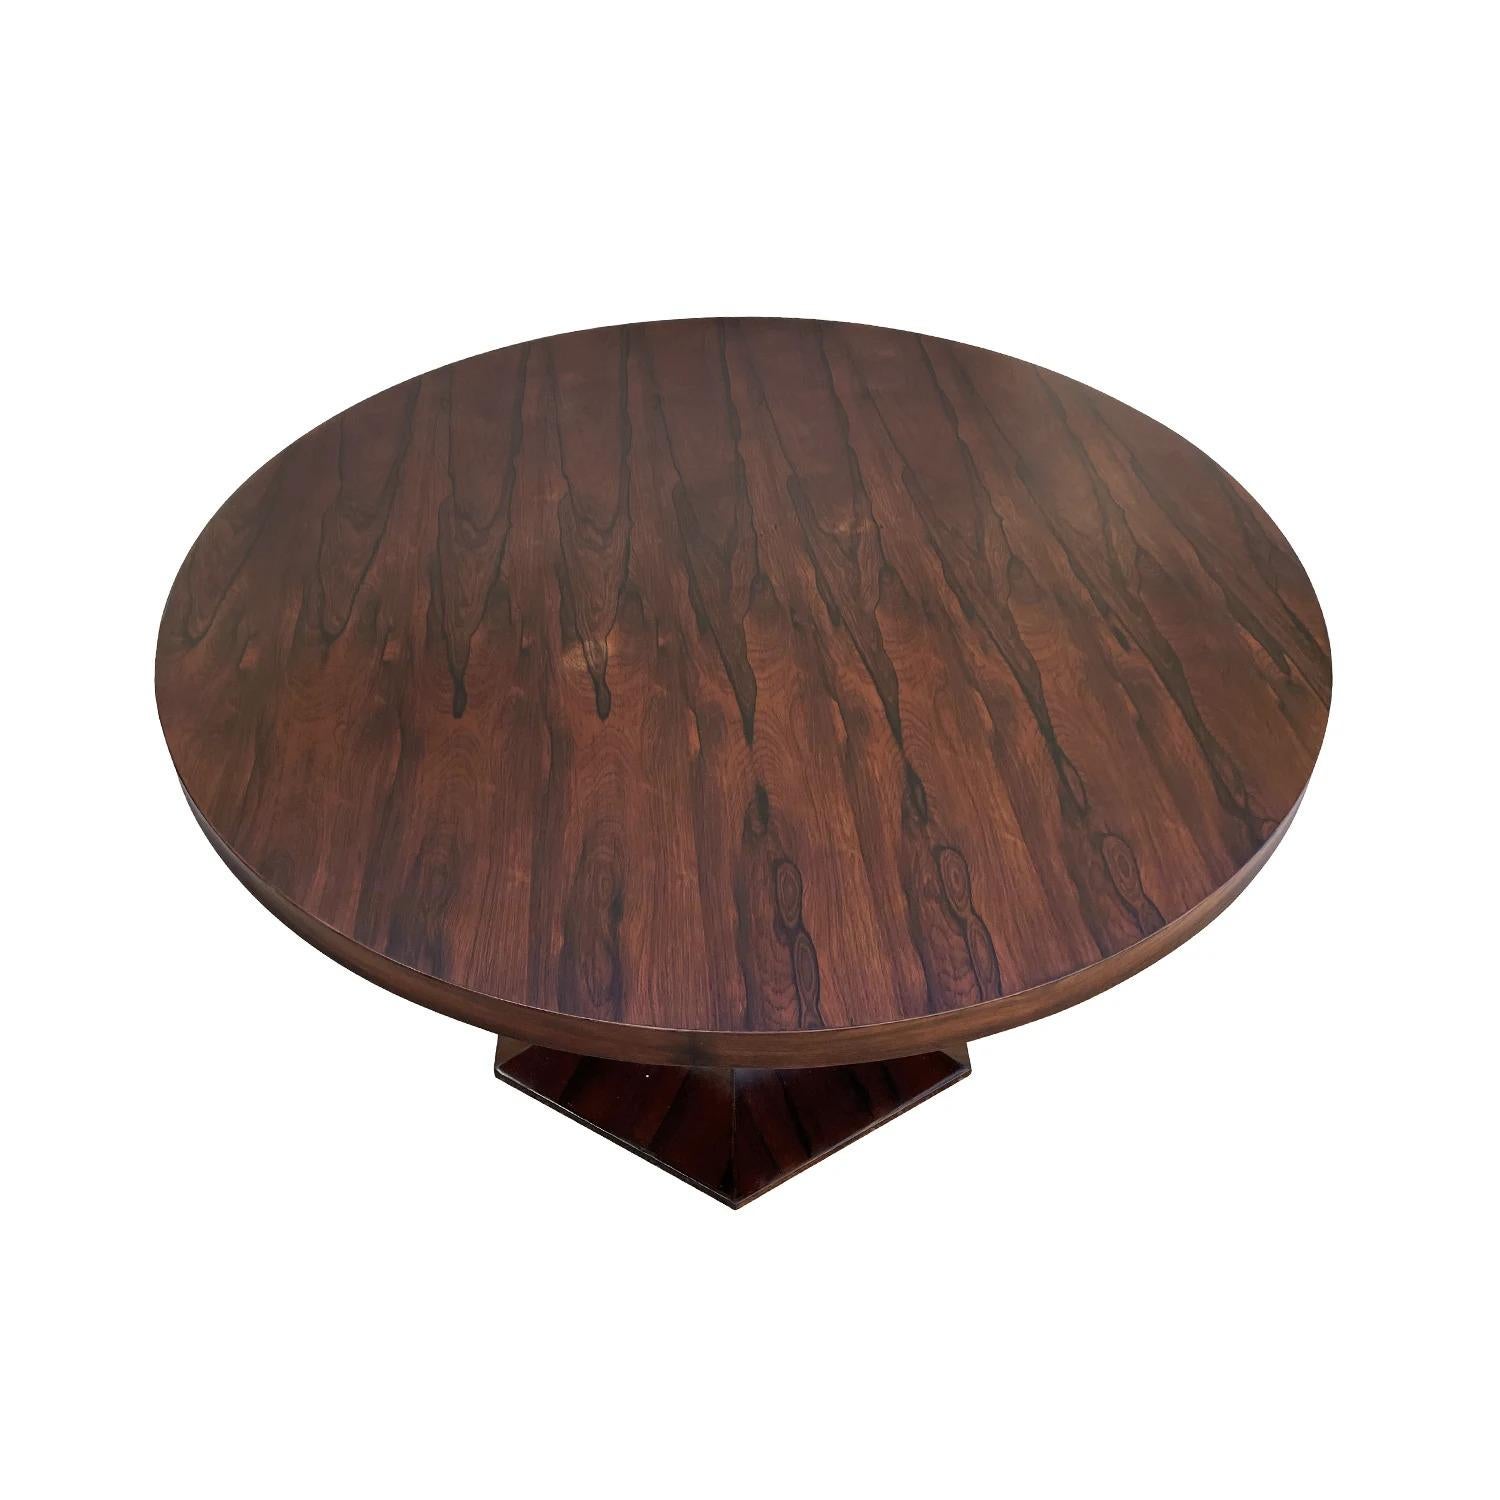 20th Century Italian Modern Vintage Polished Rosewood Dining, Center Table For Sale 1